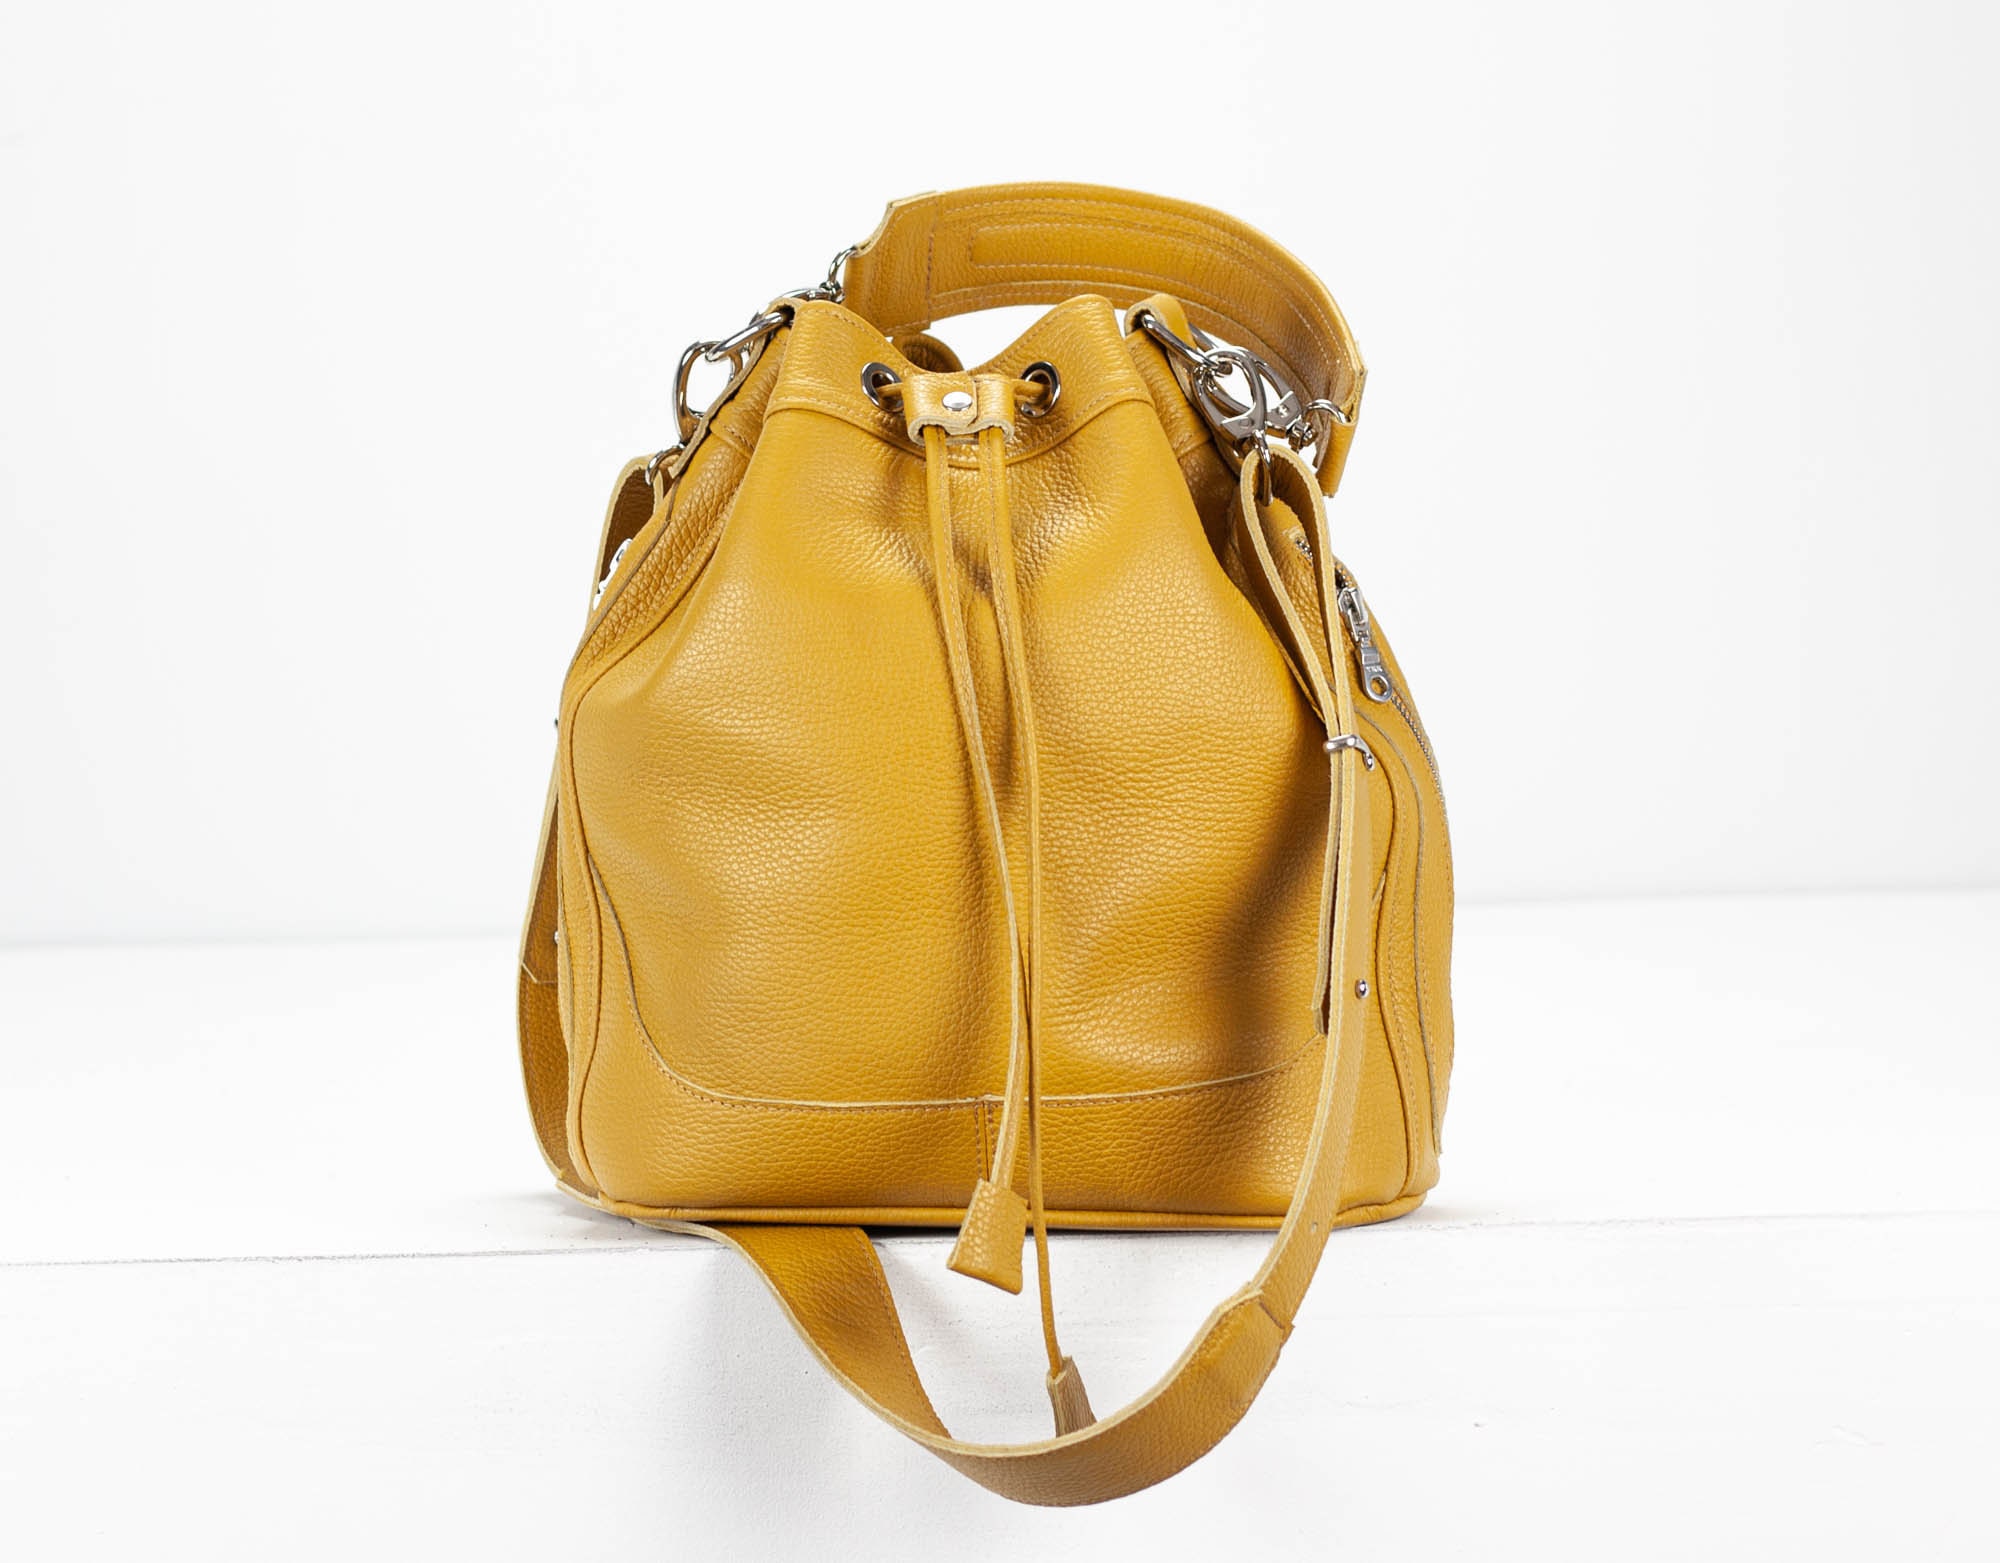 DRAWSTRING BUCKET BAG - FULL LEATHER COLLECTION - SLATE